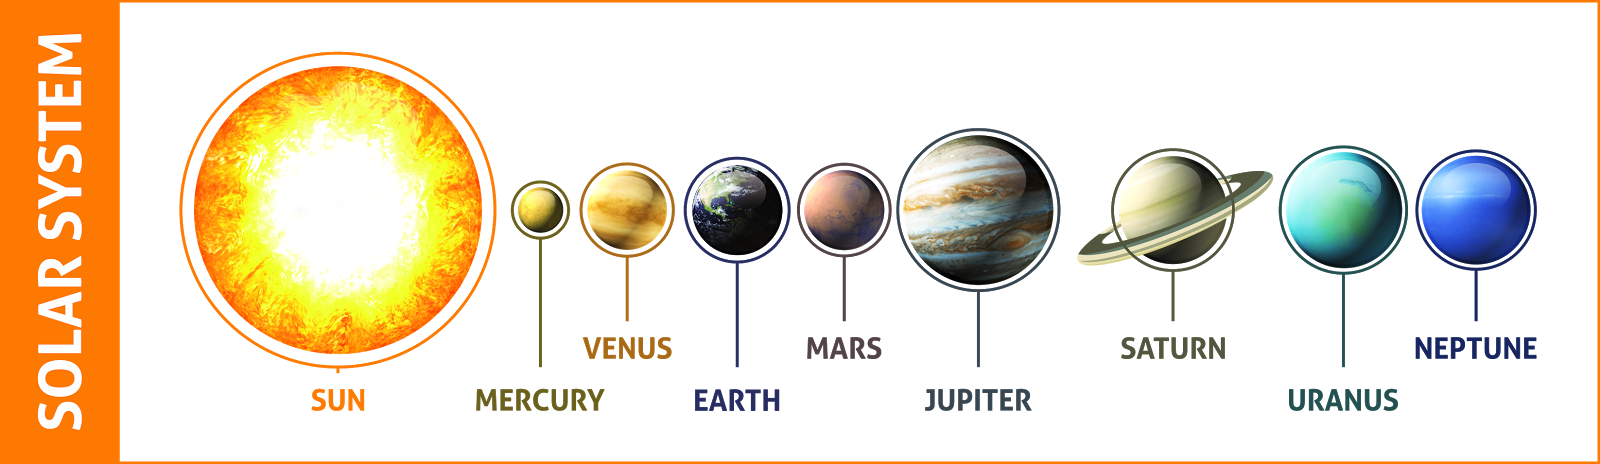 Distance of the Planets (Mercury, Venus, Earth, Mars, Jupiter) from 